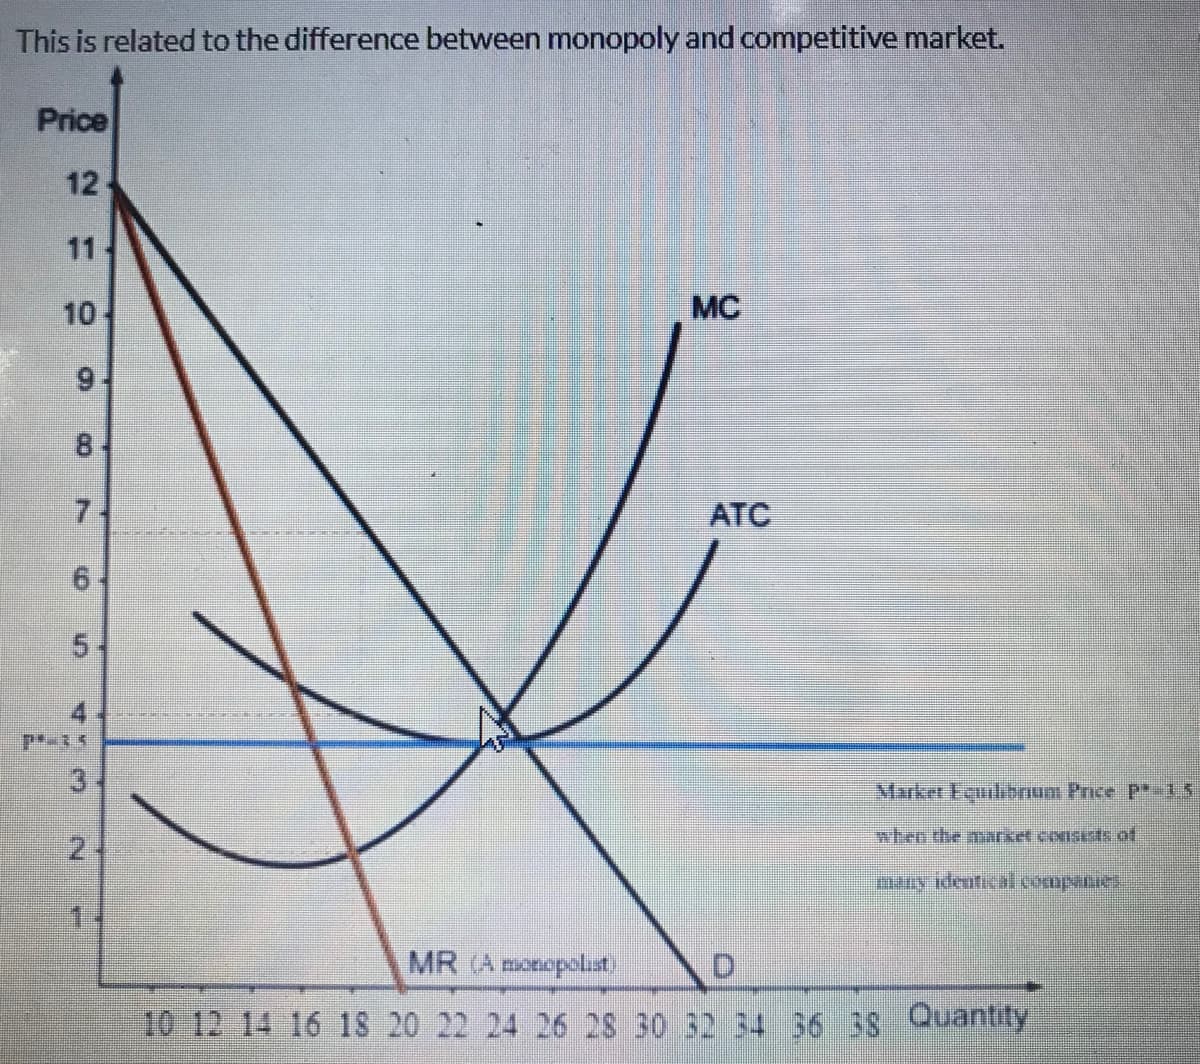 This is related to the difference between monopoly and competitive market.
Price
12
11
10
MC
9.
8
7.
ATC
9.
5.
Market Equilibrum Price P 15
2.
many identical companies
MR (A monopolist)
10 12 14 16 18 20 22 24 26 28 30 32 34 36 38 Quantity
